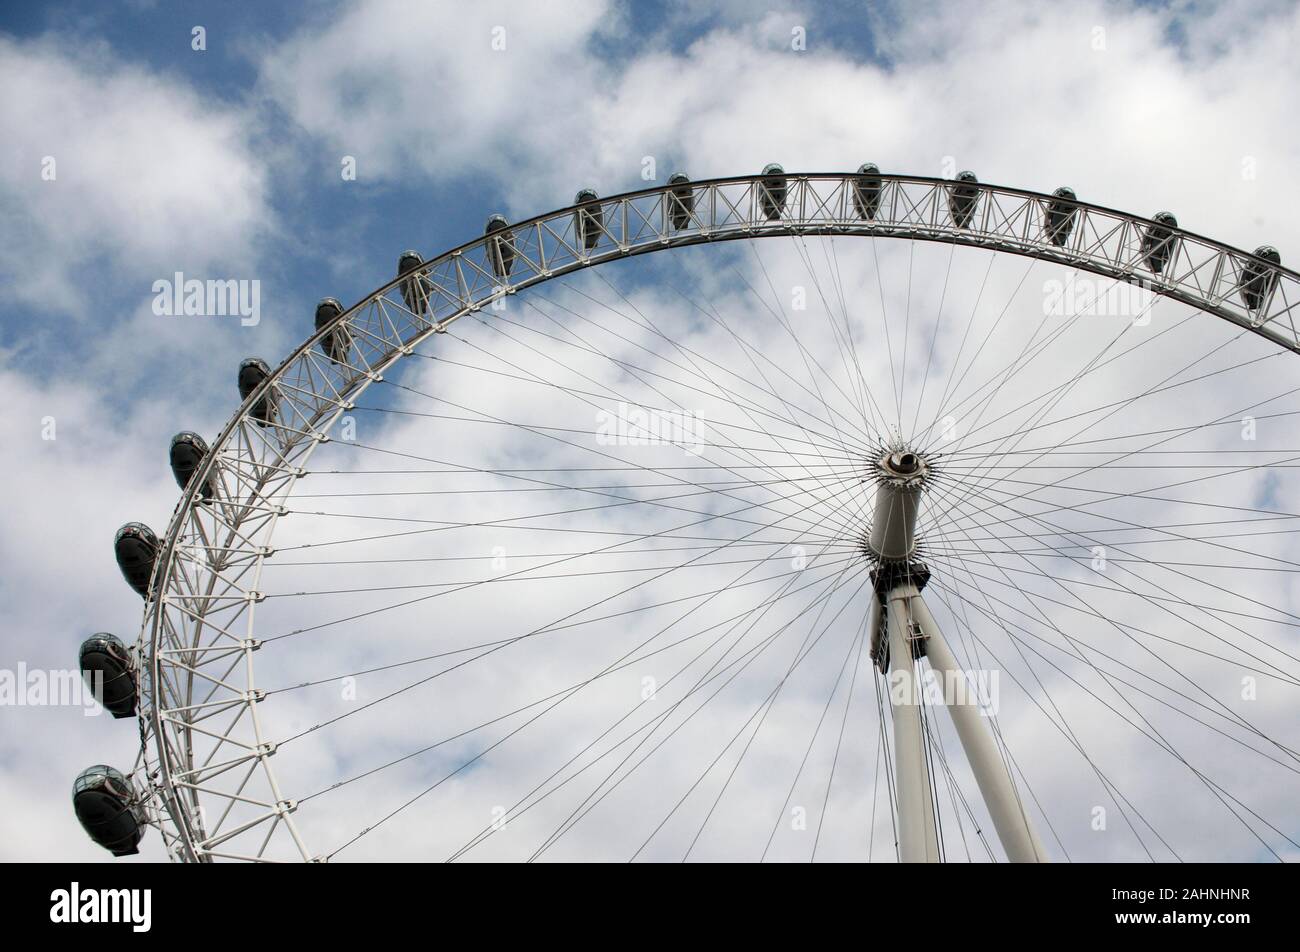 London Eye, tourist attraction close up view Stock Photo